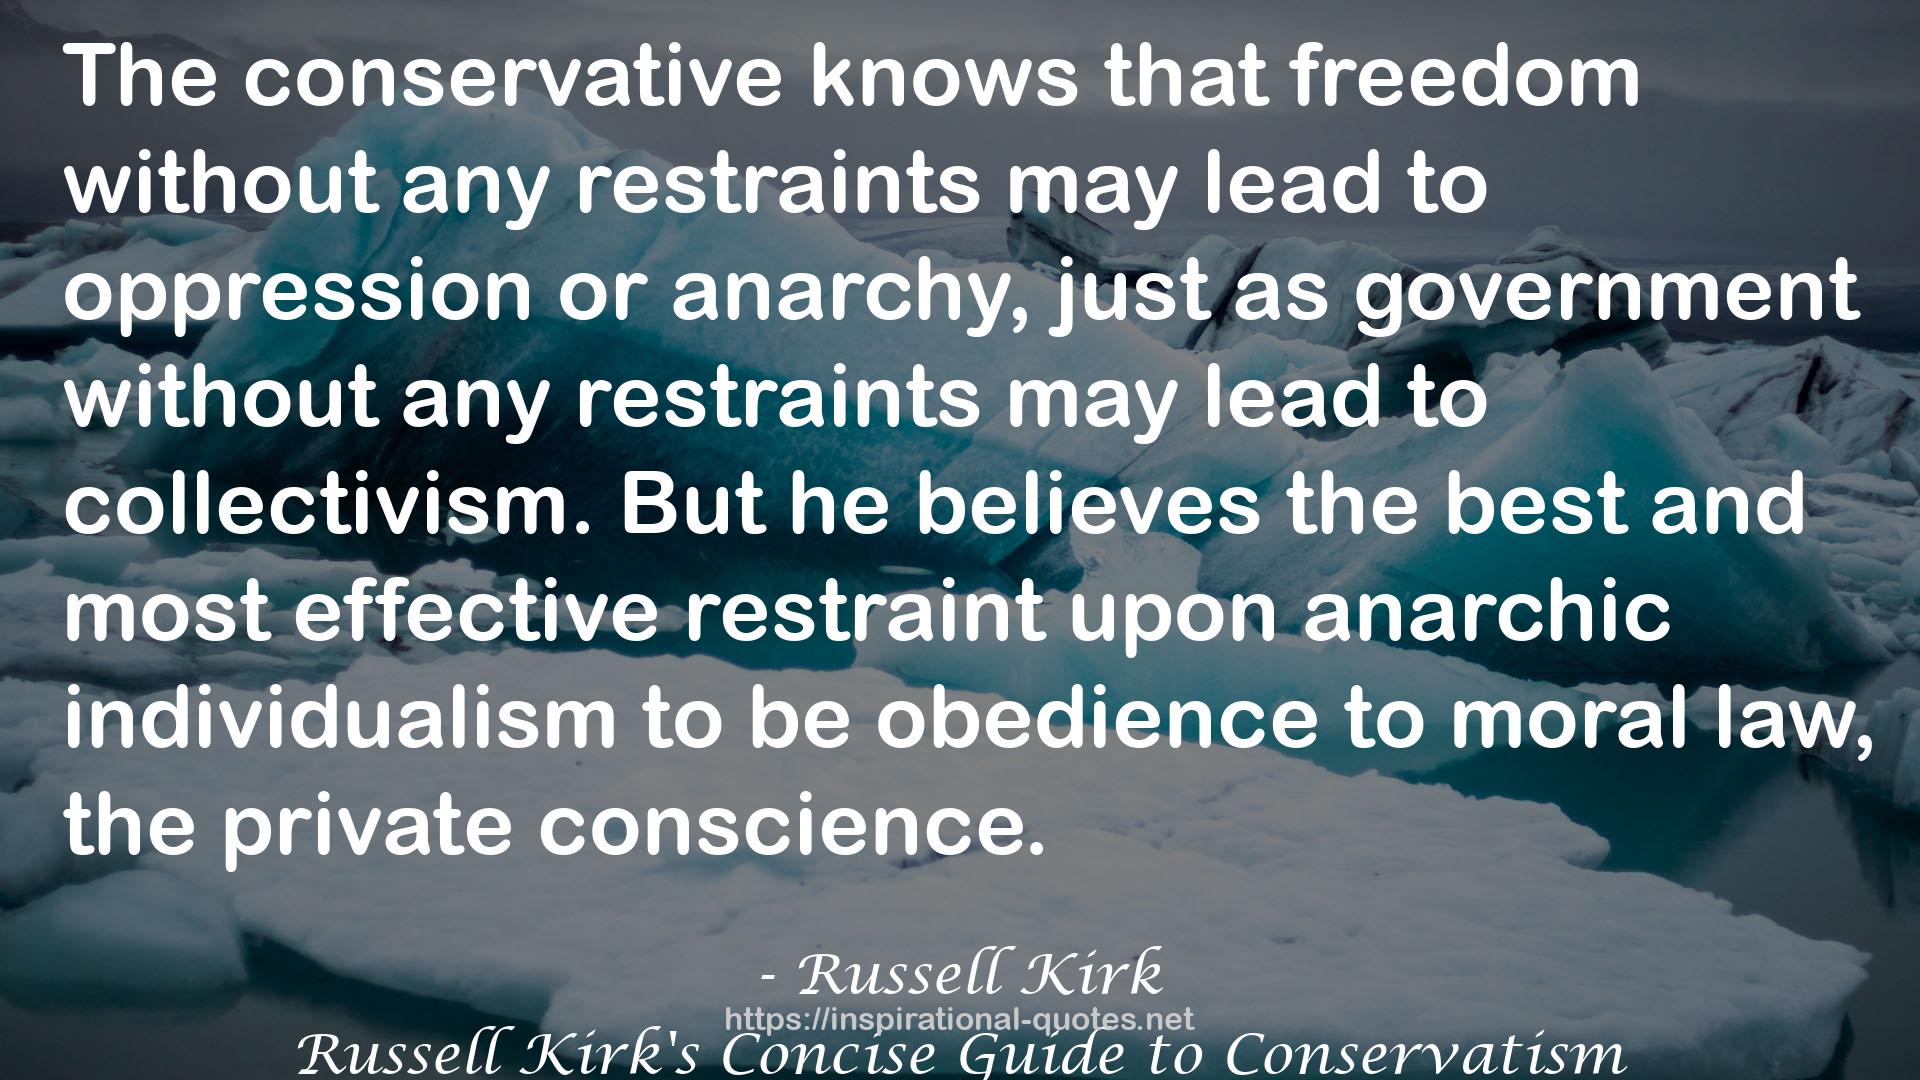 Russell Kirk's Concise Guide to Conservatism QUOTES